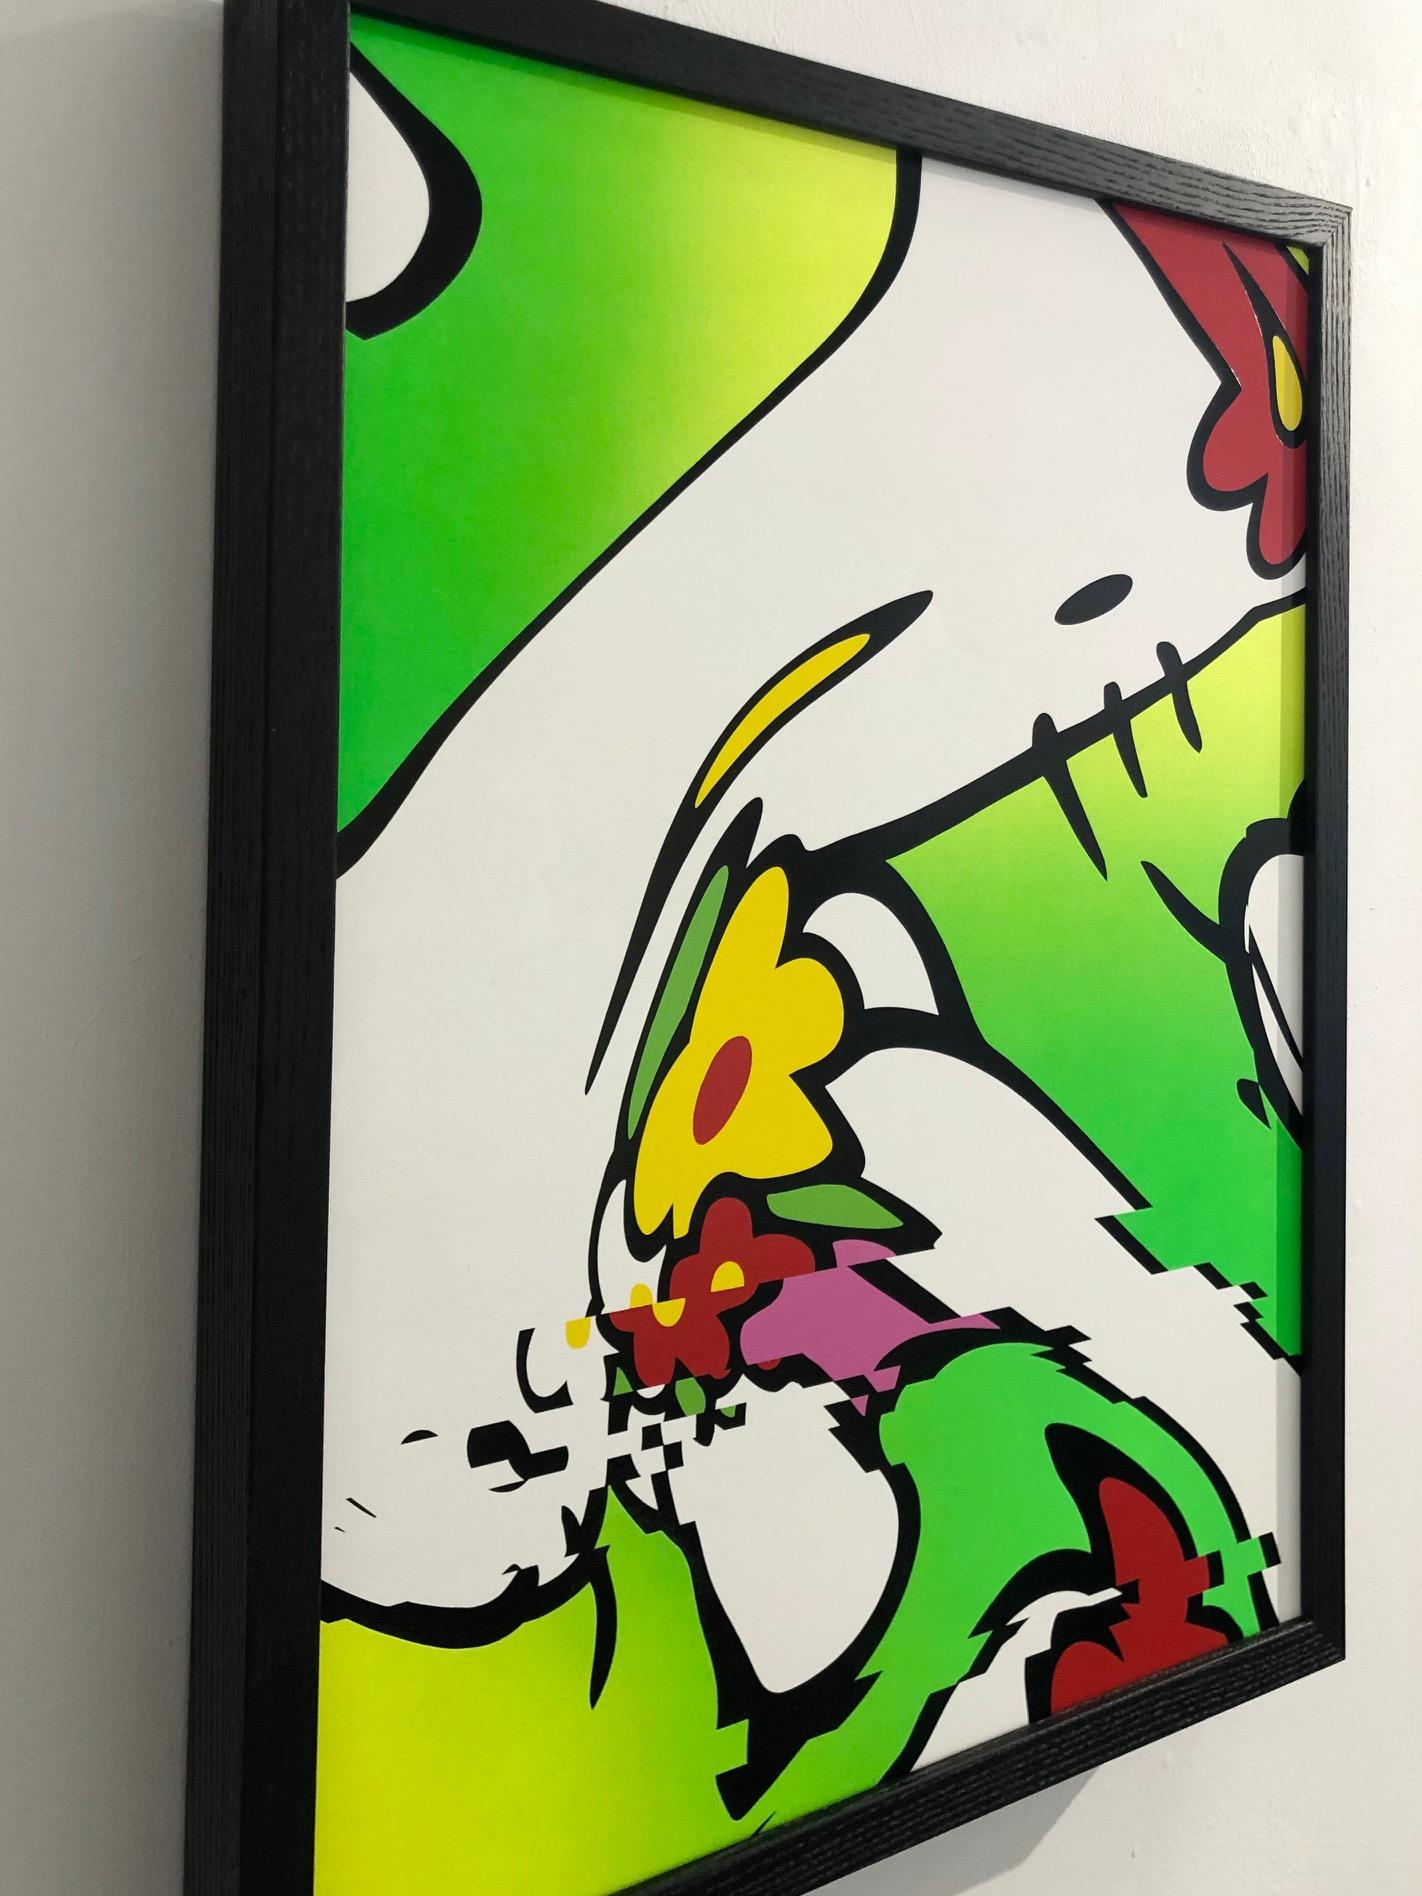 “Neon Pu$$” framed in a black shadow box  - Painting by Clean Cut Visuals